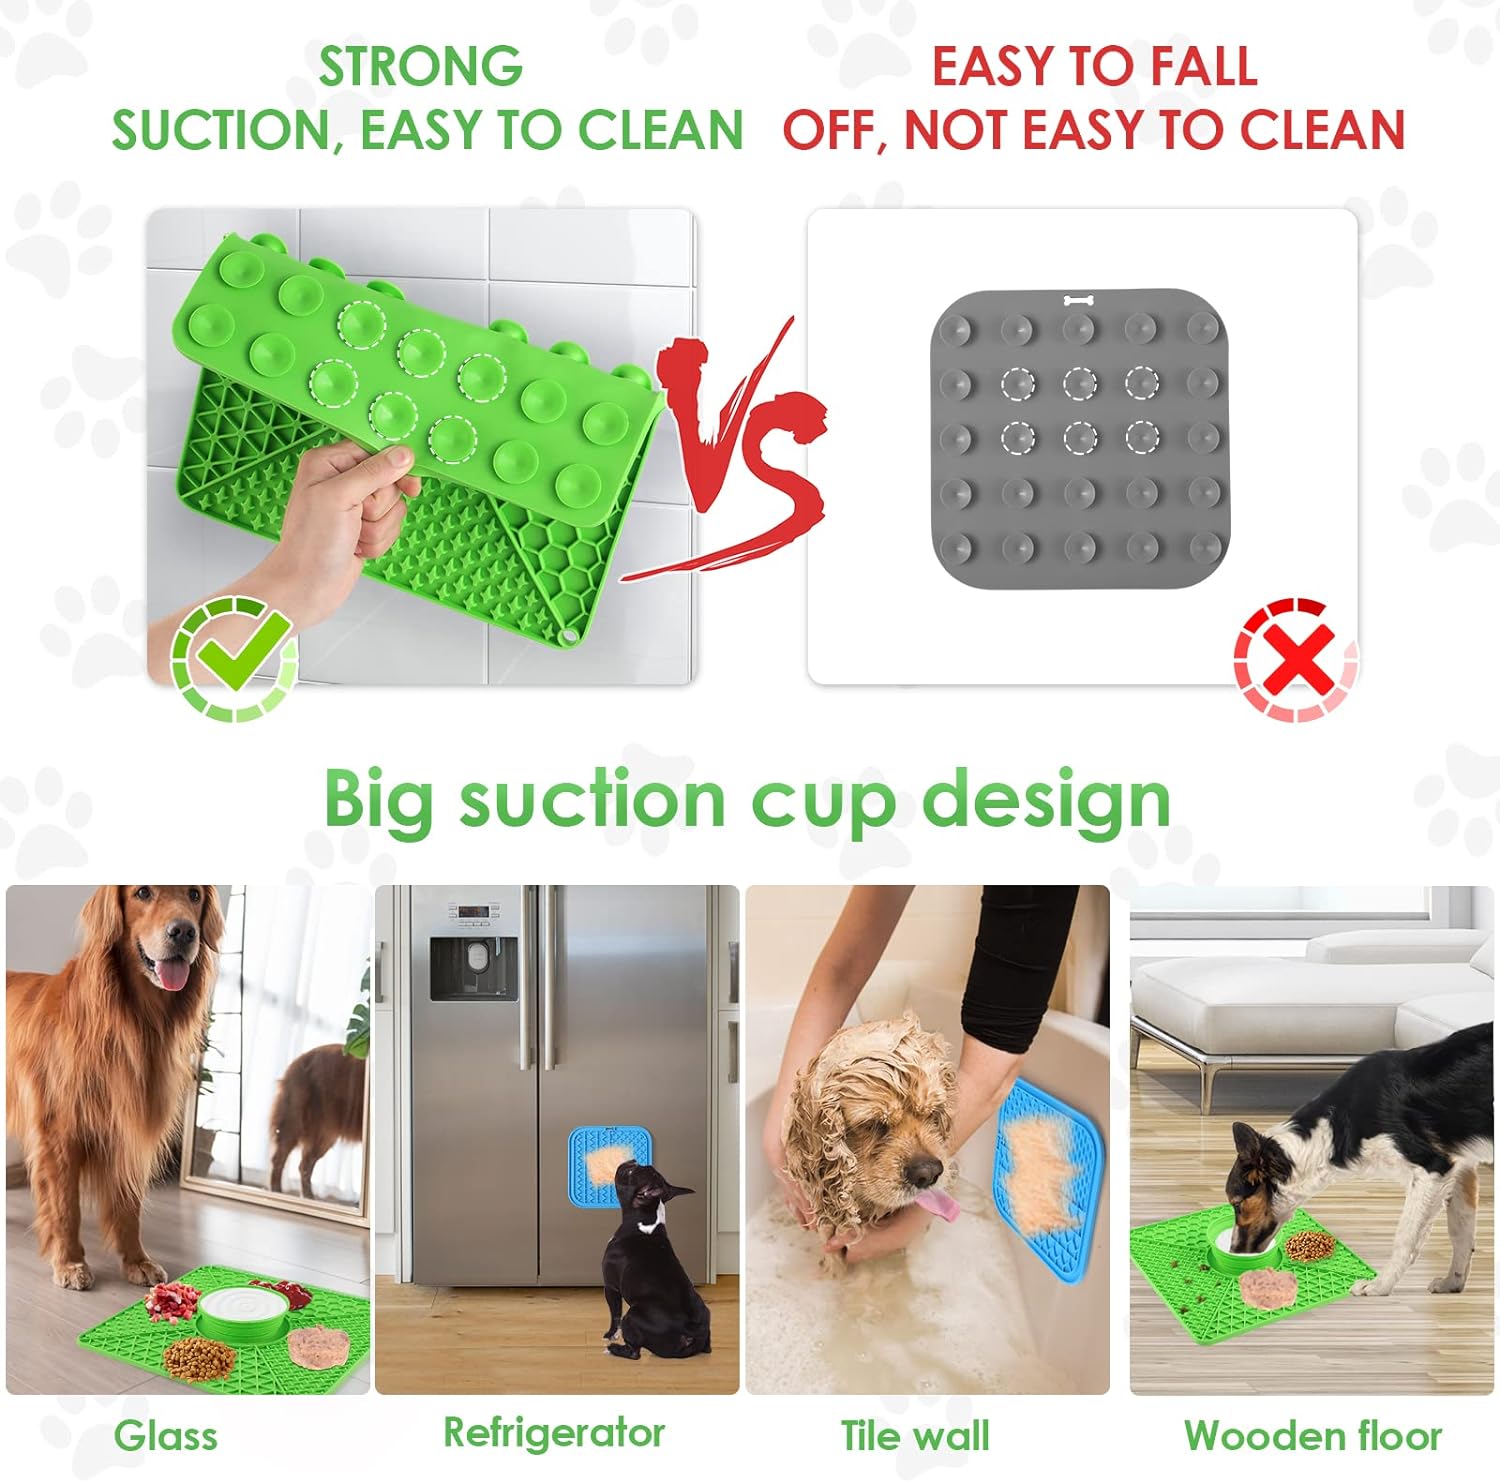 ODRIEW Lick Mats for Dogs Large, 2 Pack Cat and Dog Lick Mat, Silicone Lick Mat with Suction Cups and Retractable Water Bowl, with Spatula and Cleaning Brush, Can Relieve Dog Anxiety